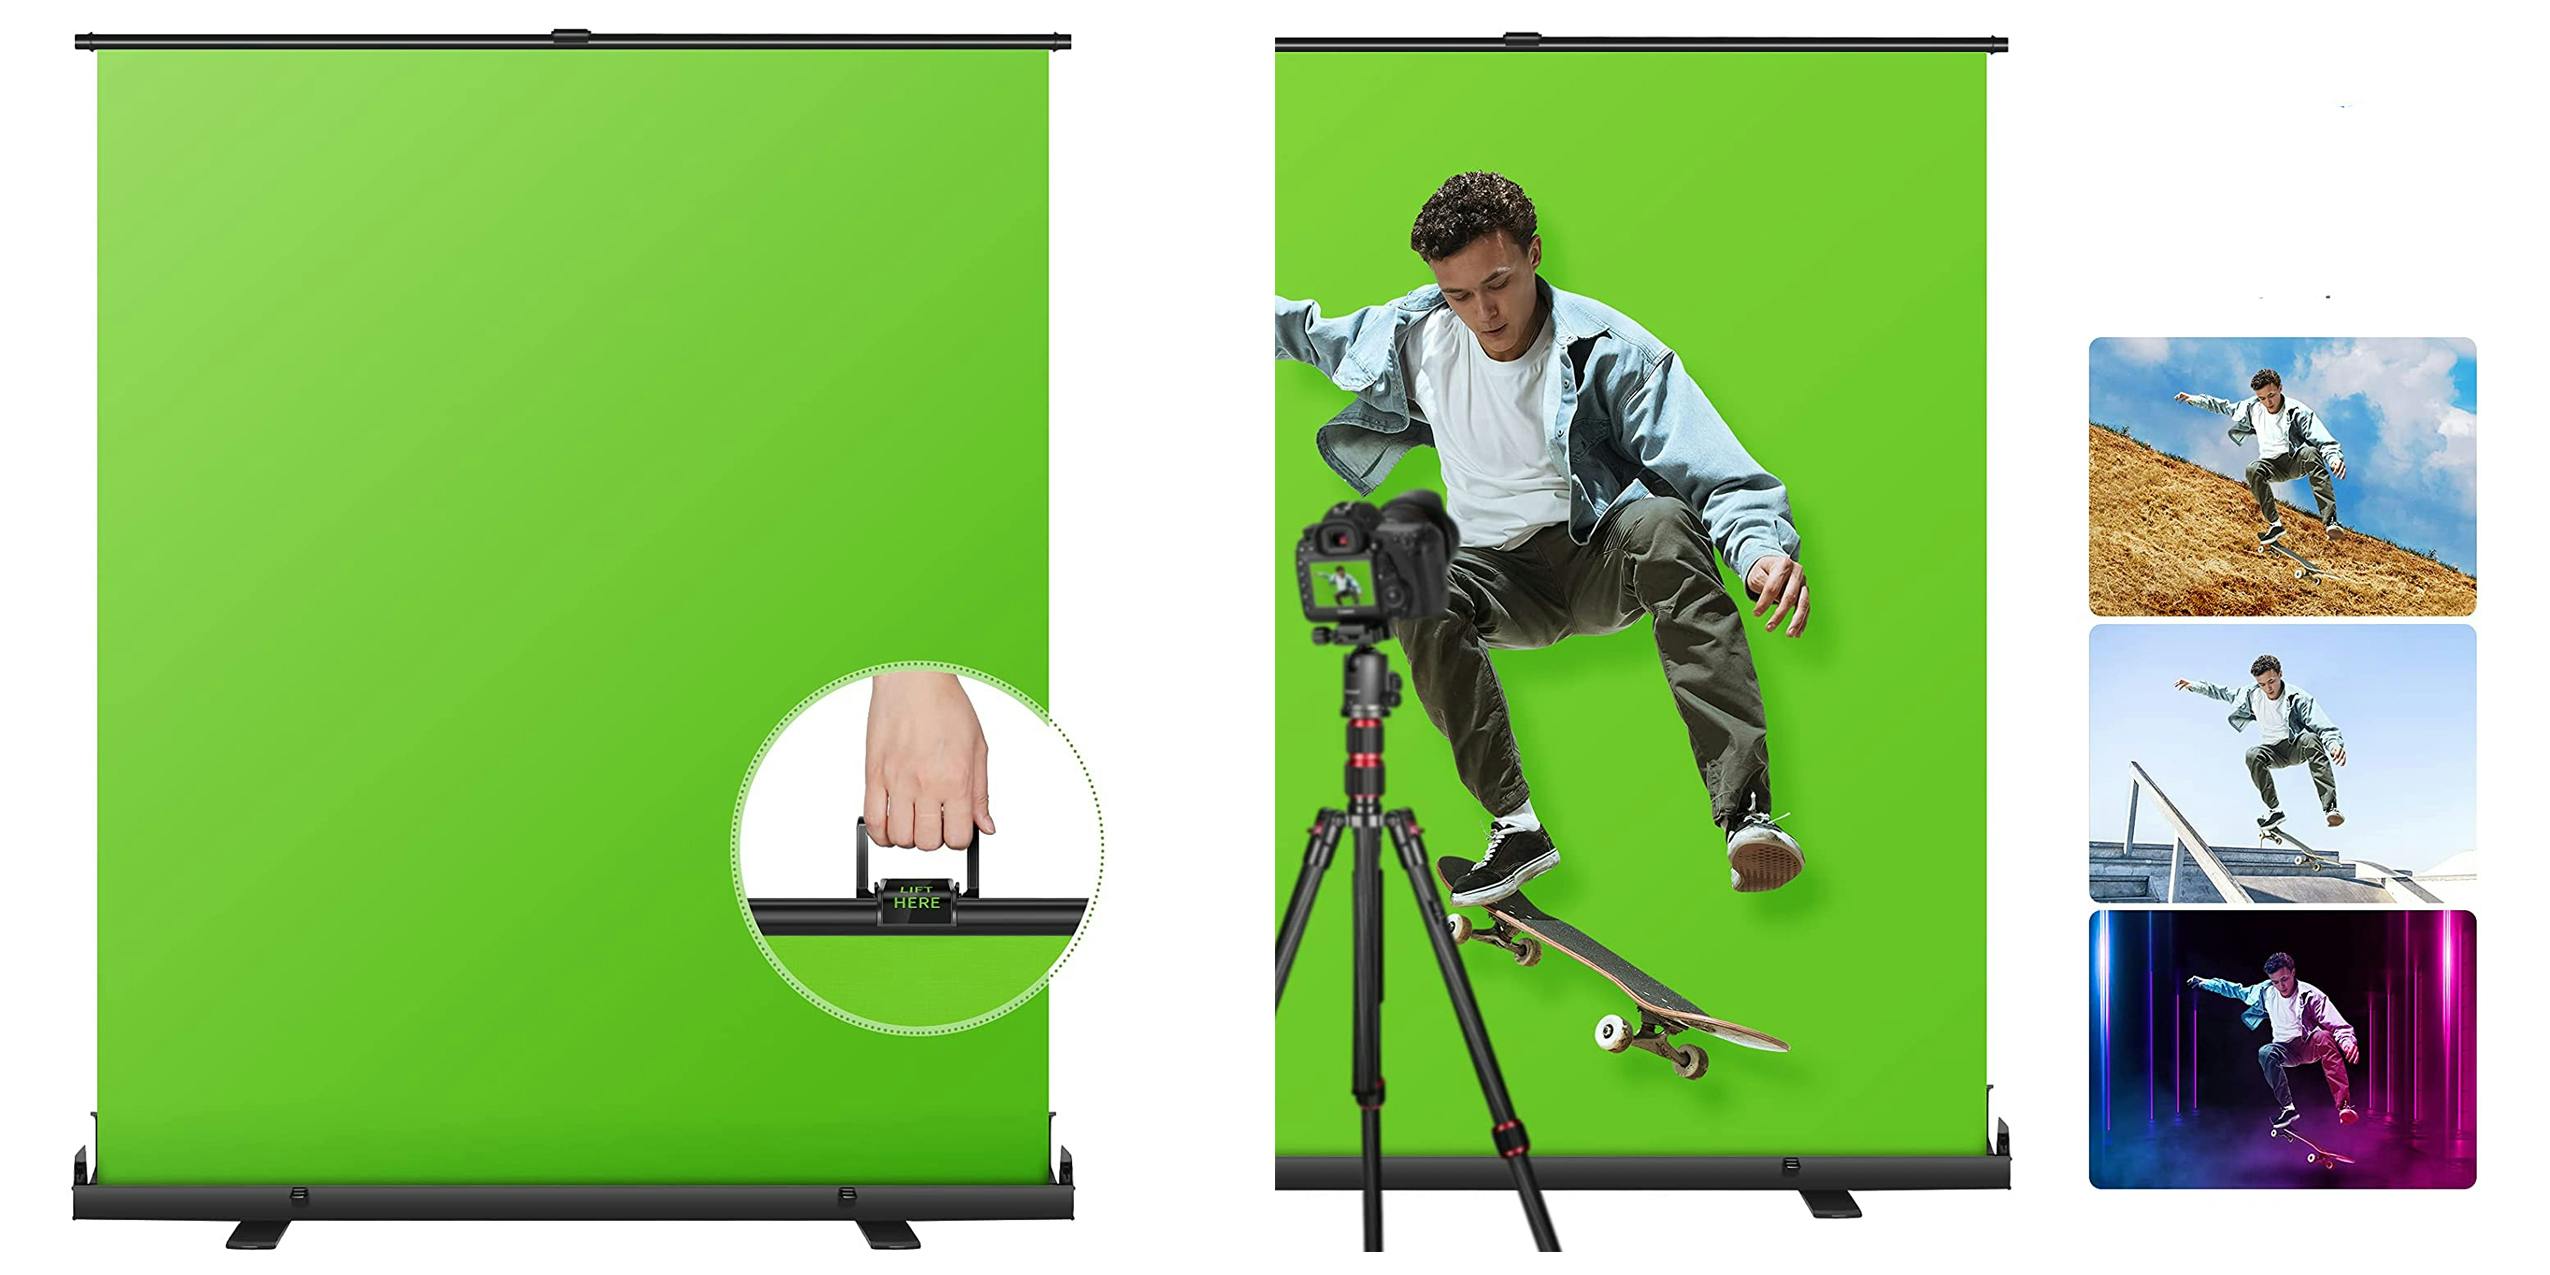 Collapsible green screen along with examples of how to use it.